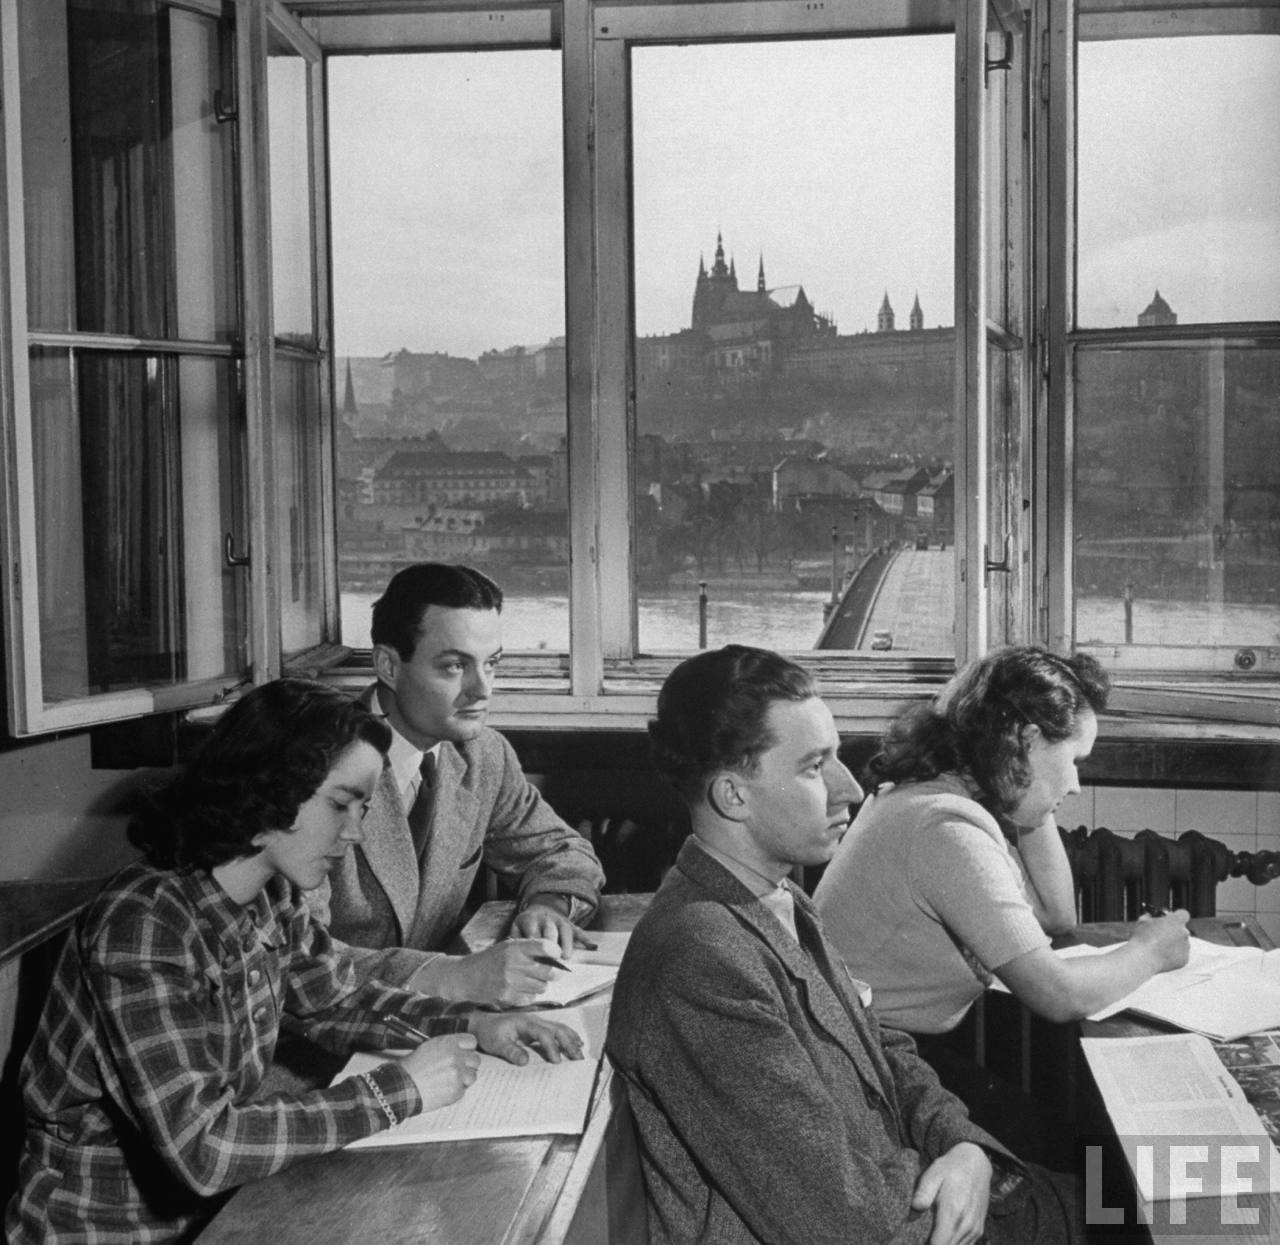 John Skrivanek (Rear L) of Austin,Texas, with fellow students in classroom of philosophy building of Charles University on banks of the Vltava River overlooking ancient Hradcany castle and St. Vitus Cathedral.